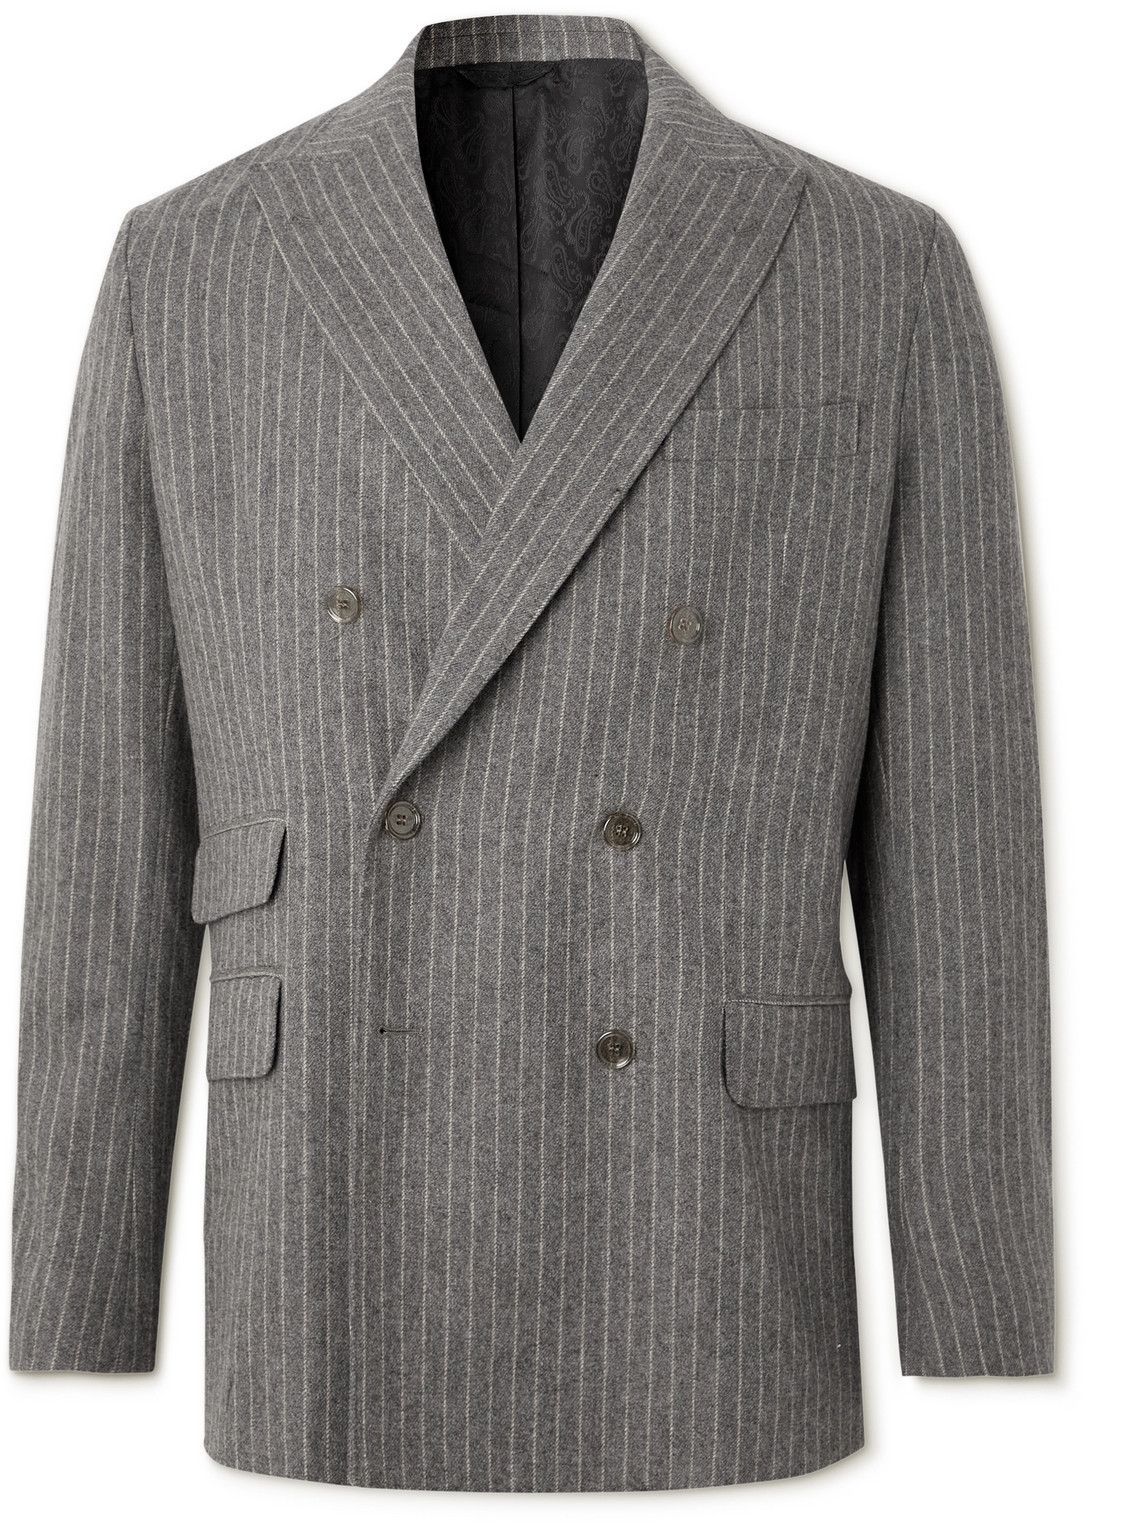 Acne Studios - Oversized Double-Breasted Pinstriped Wool-Blend Suit ...